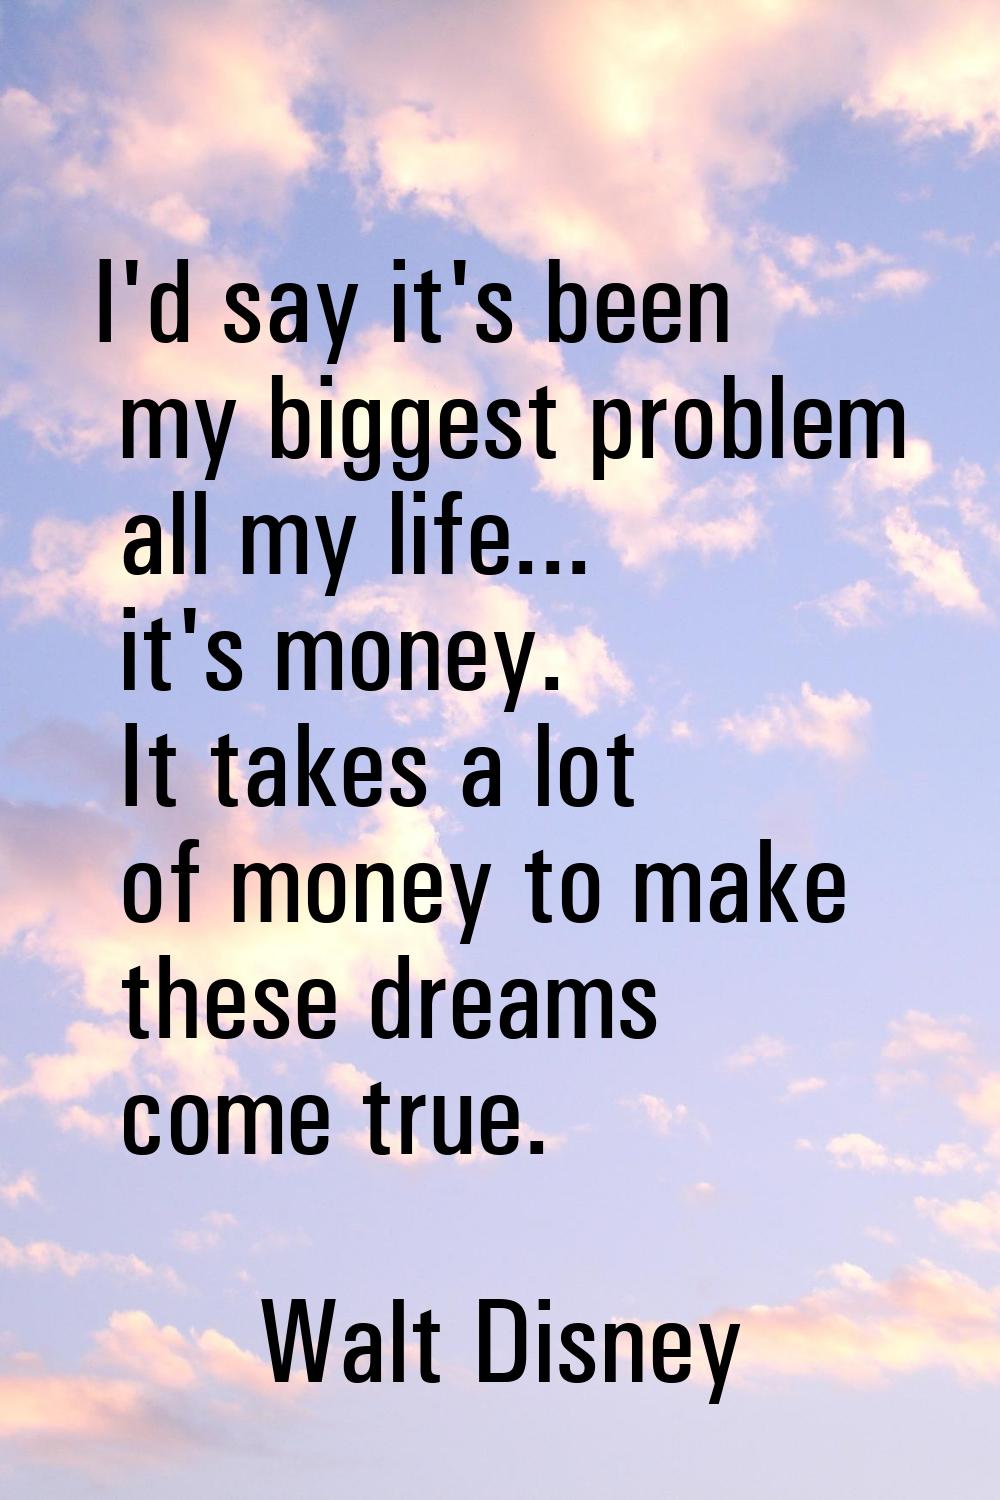 I'd say it's been my biggest problem all my life... it's money. It takes a lot of money to make the